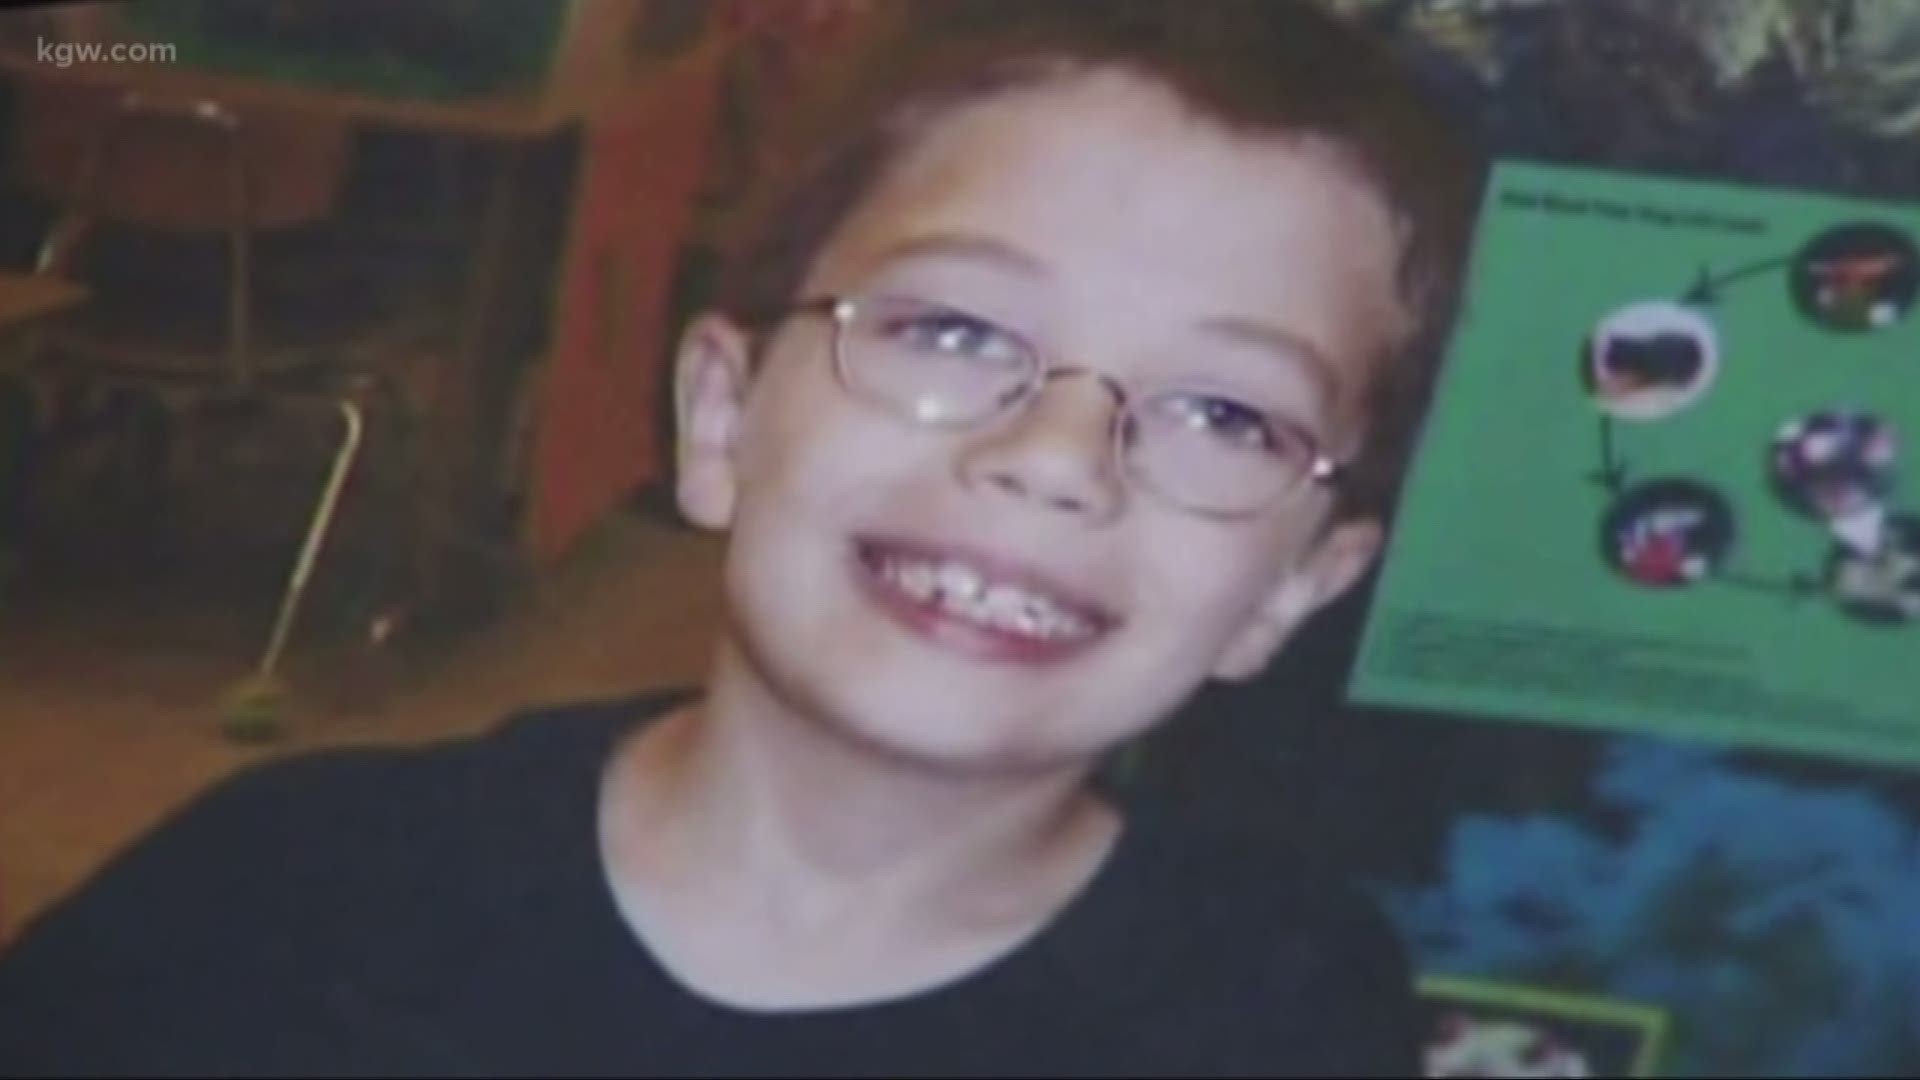 Kyron Horman has been missing for 8 years.